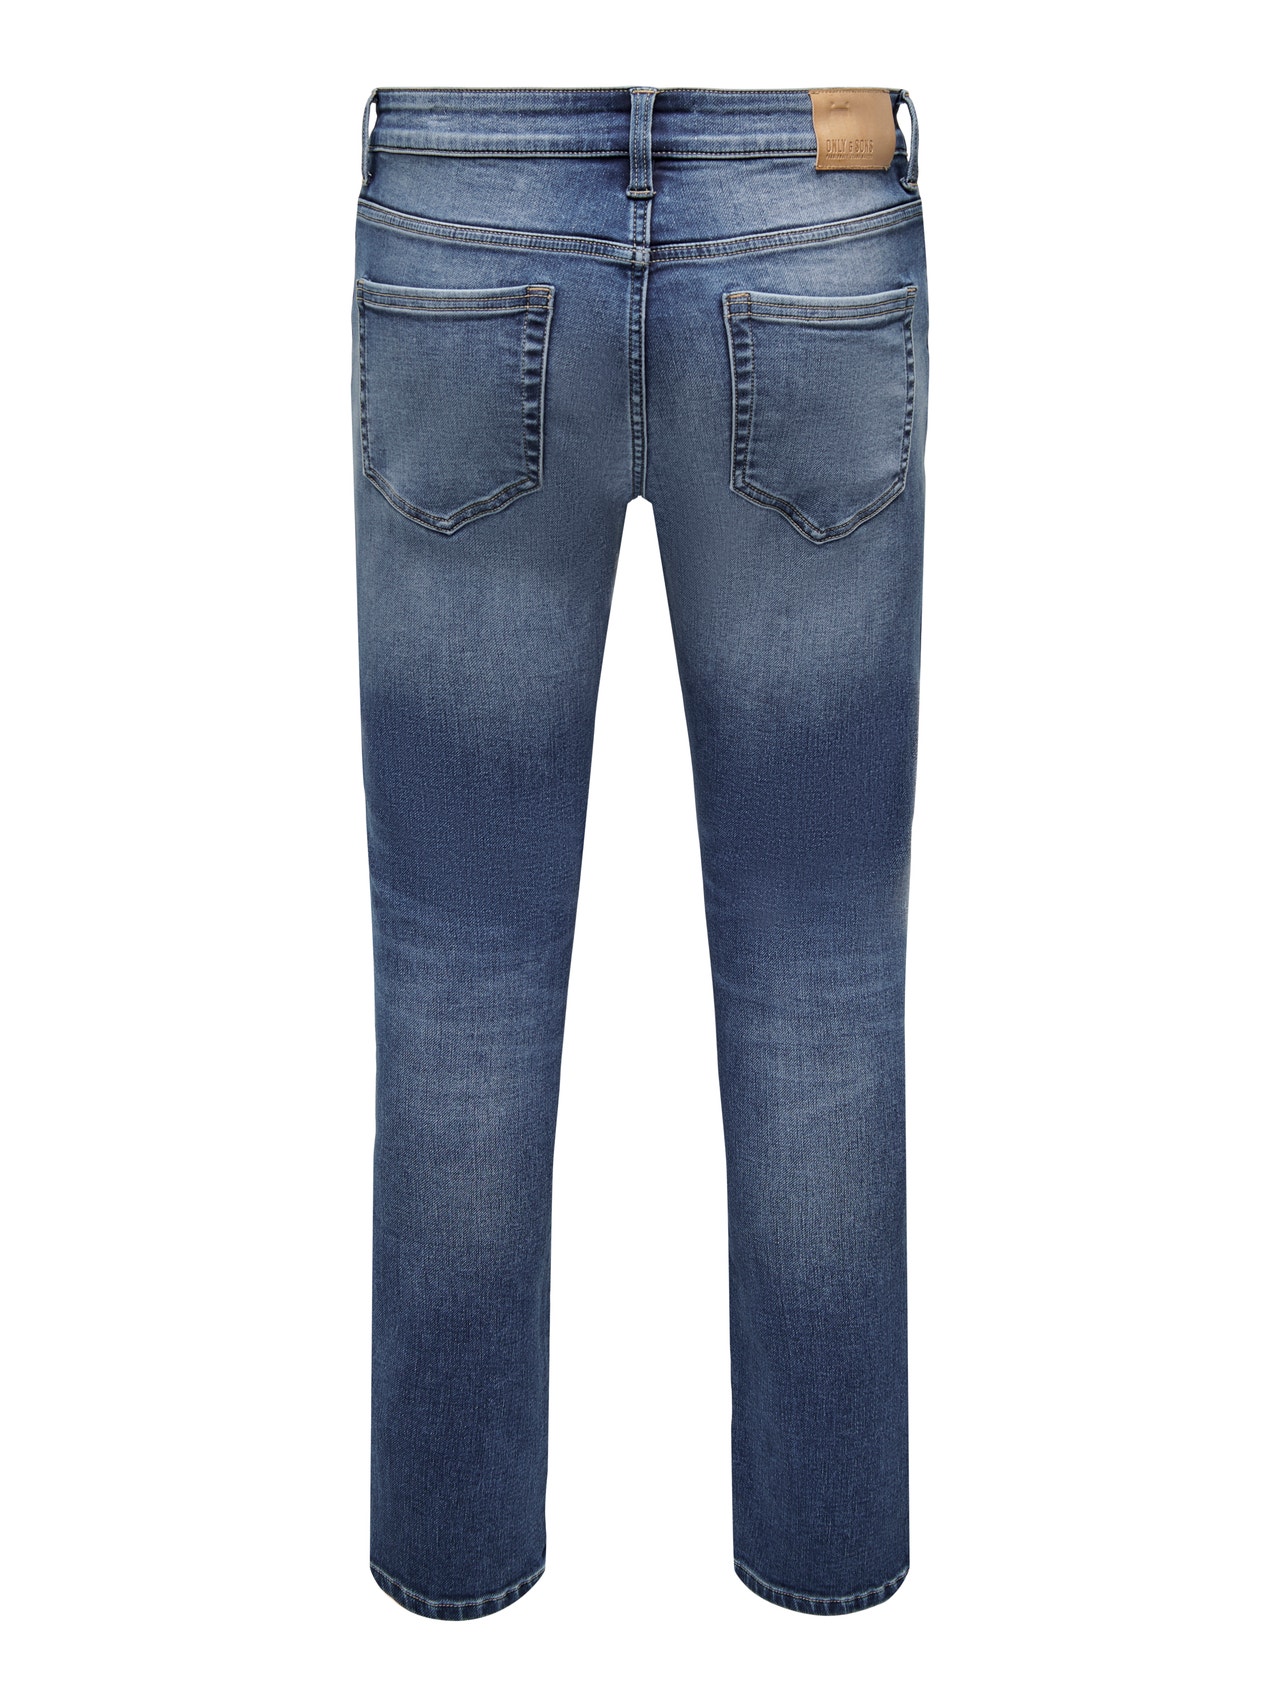 ONLY & SONS Jeans Slim Fit Taille moyenne -Medium Blue Denim - 22023522